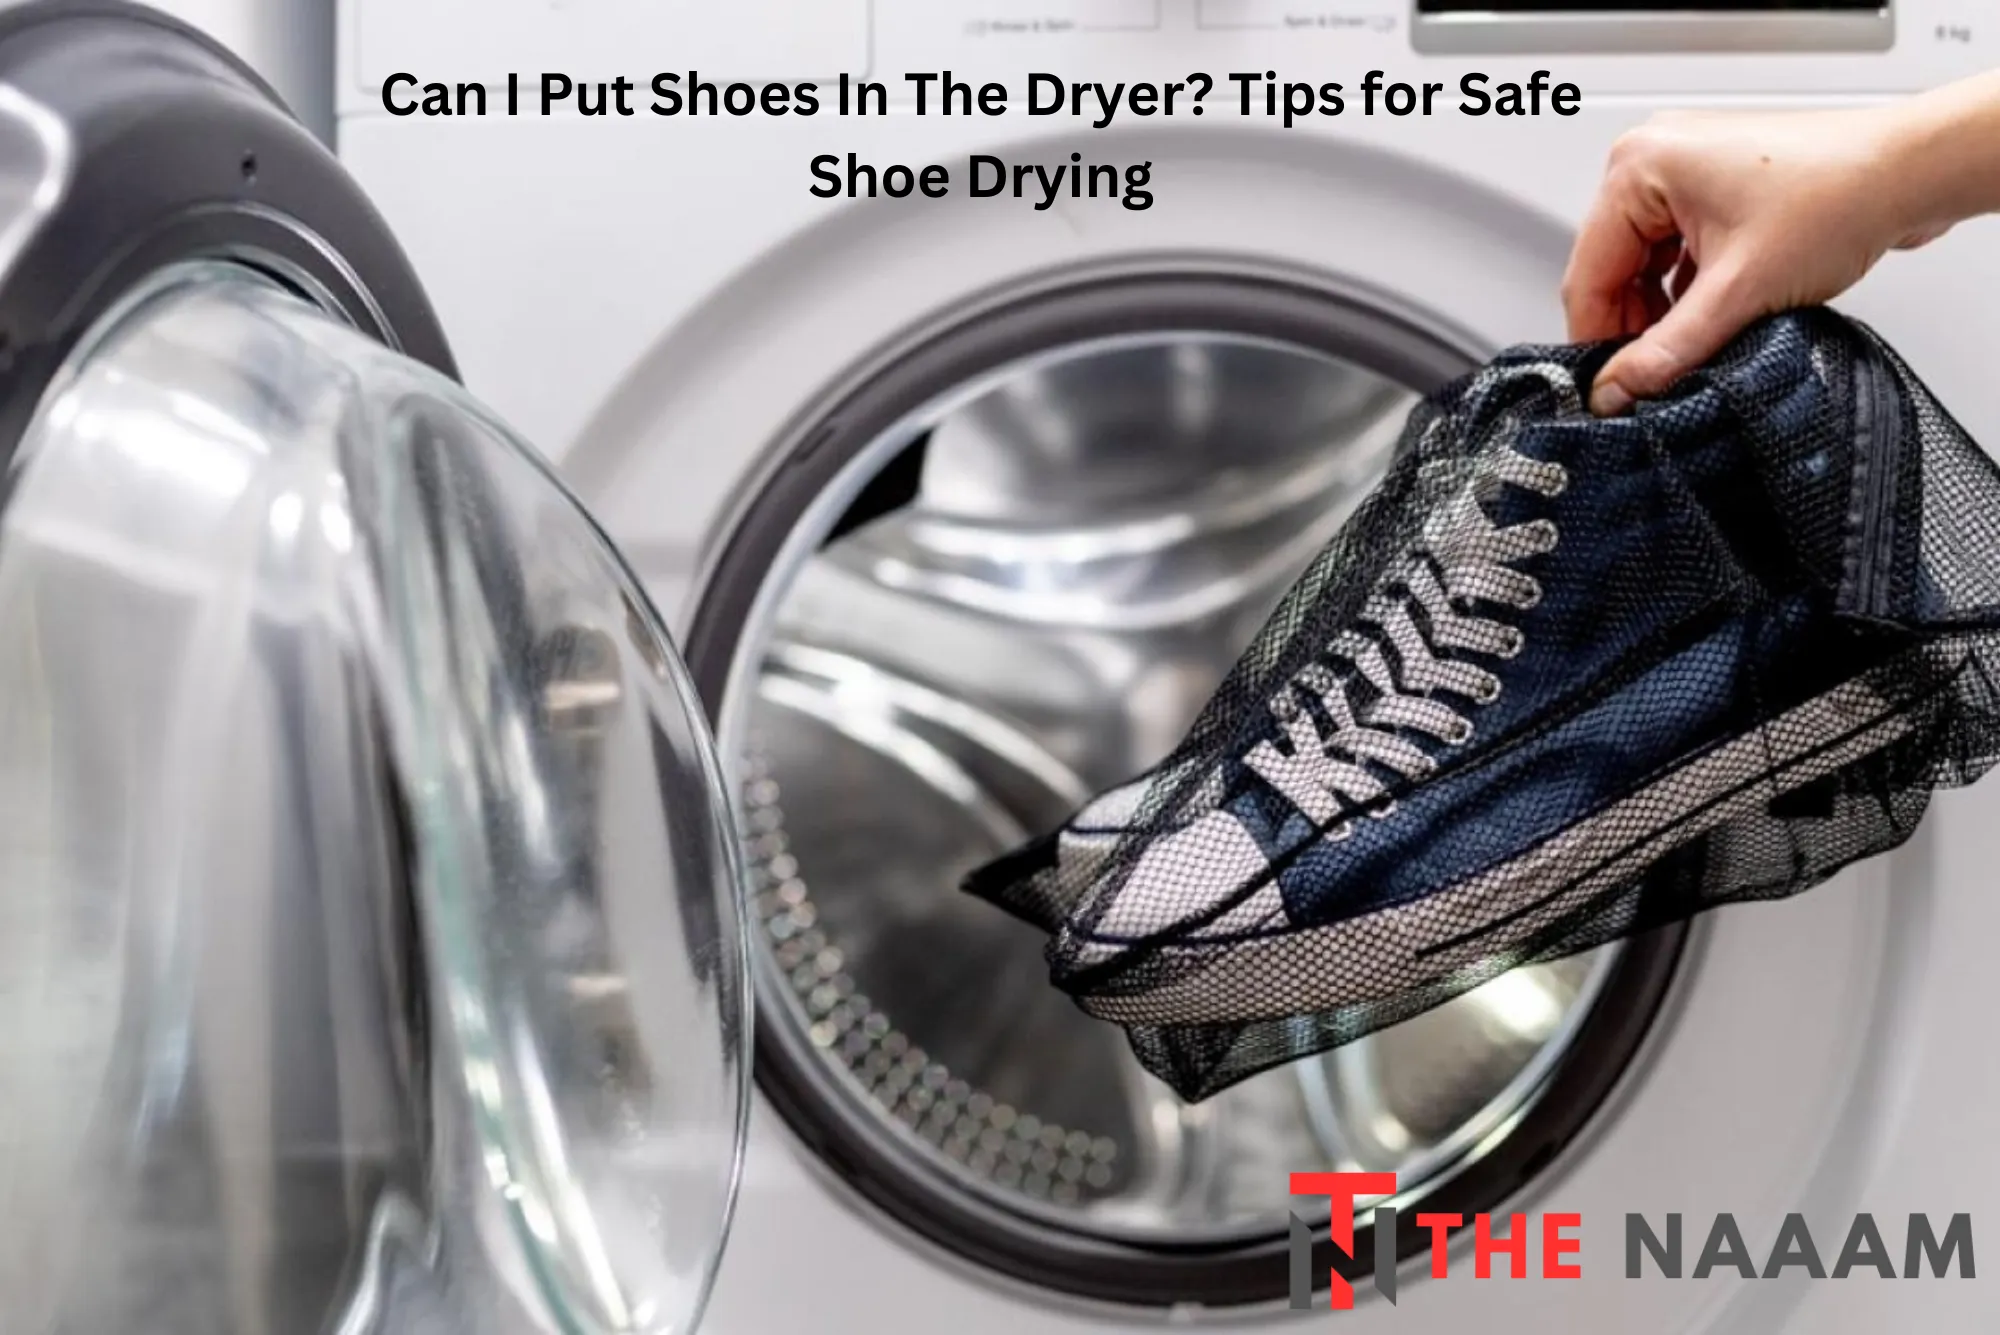 Can I Put Shoes In The Dryer Tips for Safe Shoe Drying